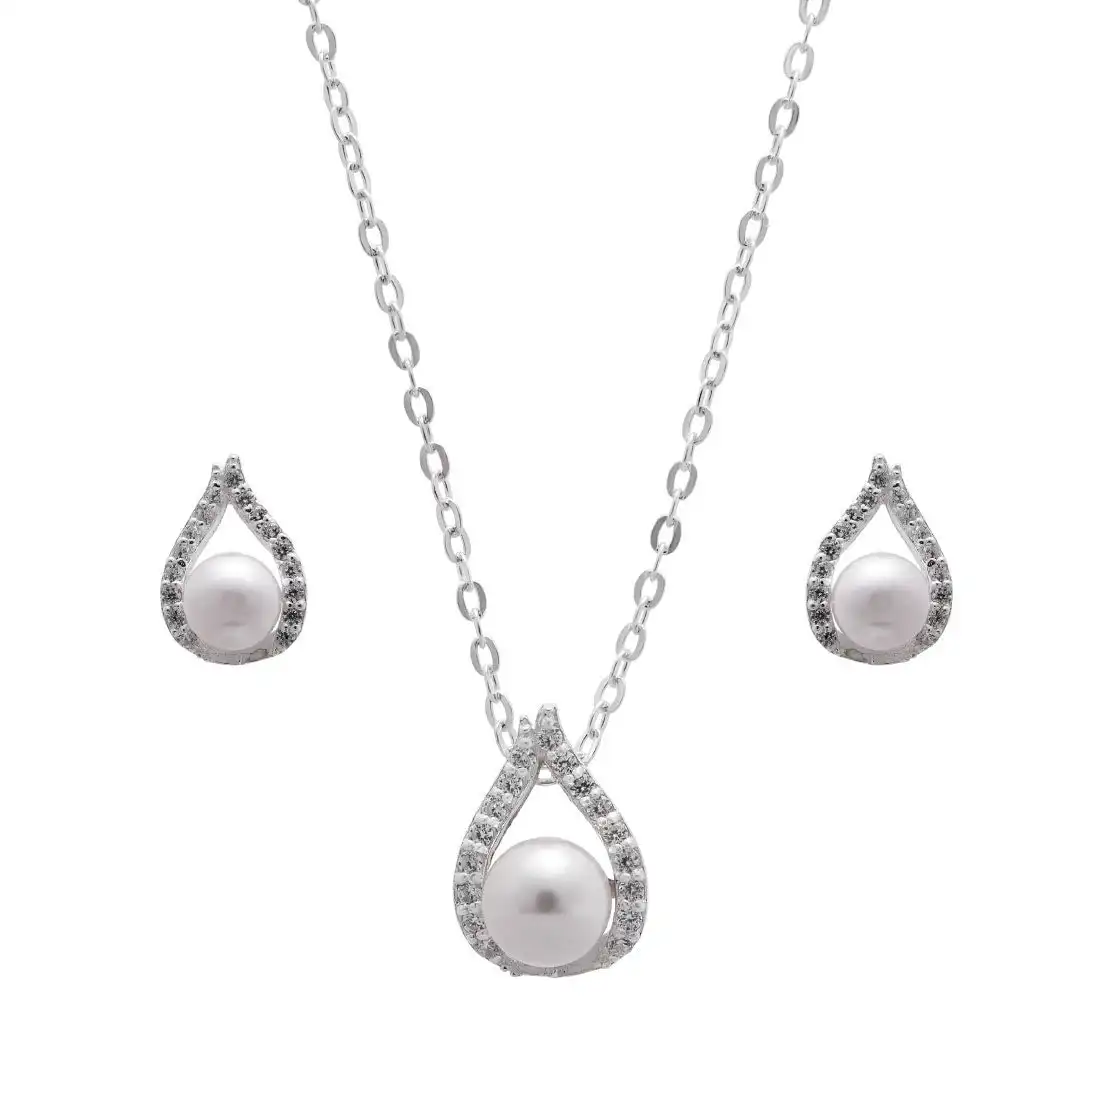 Synthetic White Pearl Necklace and Earrings Set in Sterling Silver